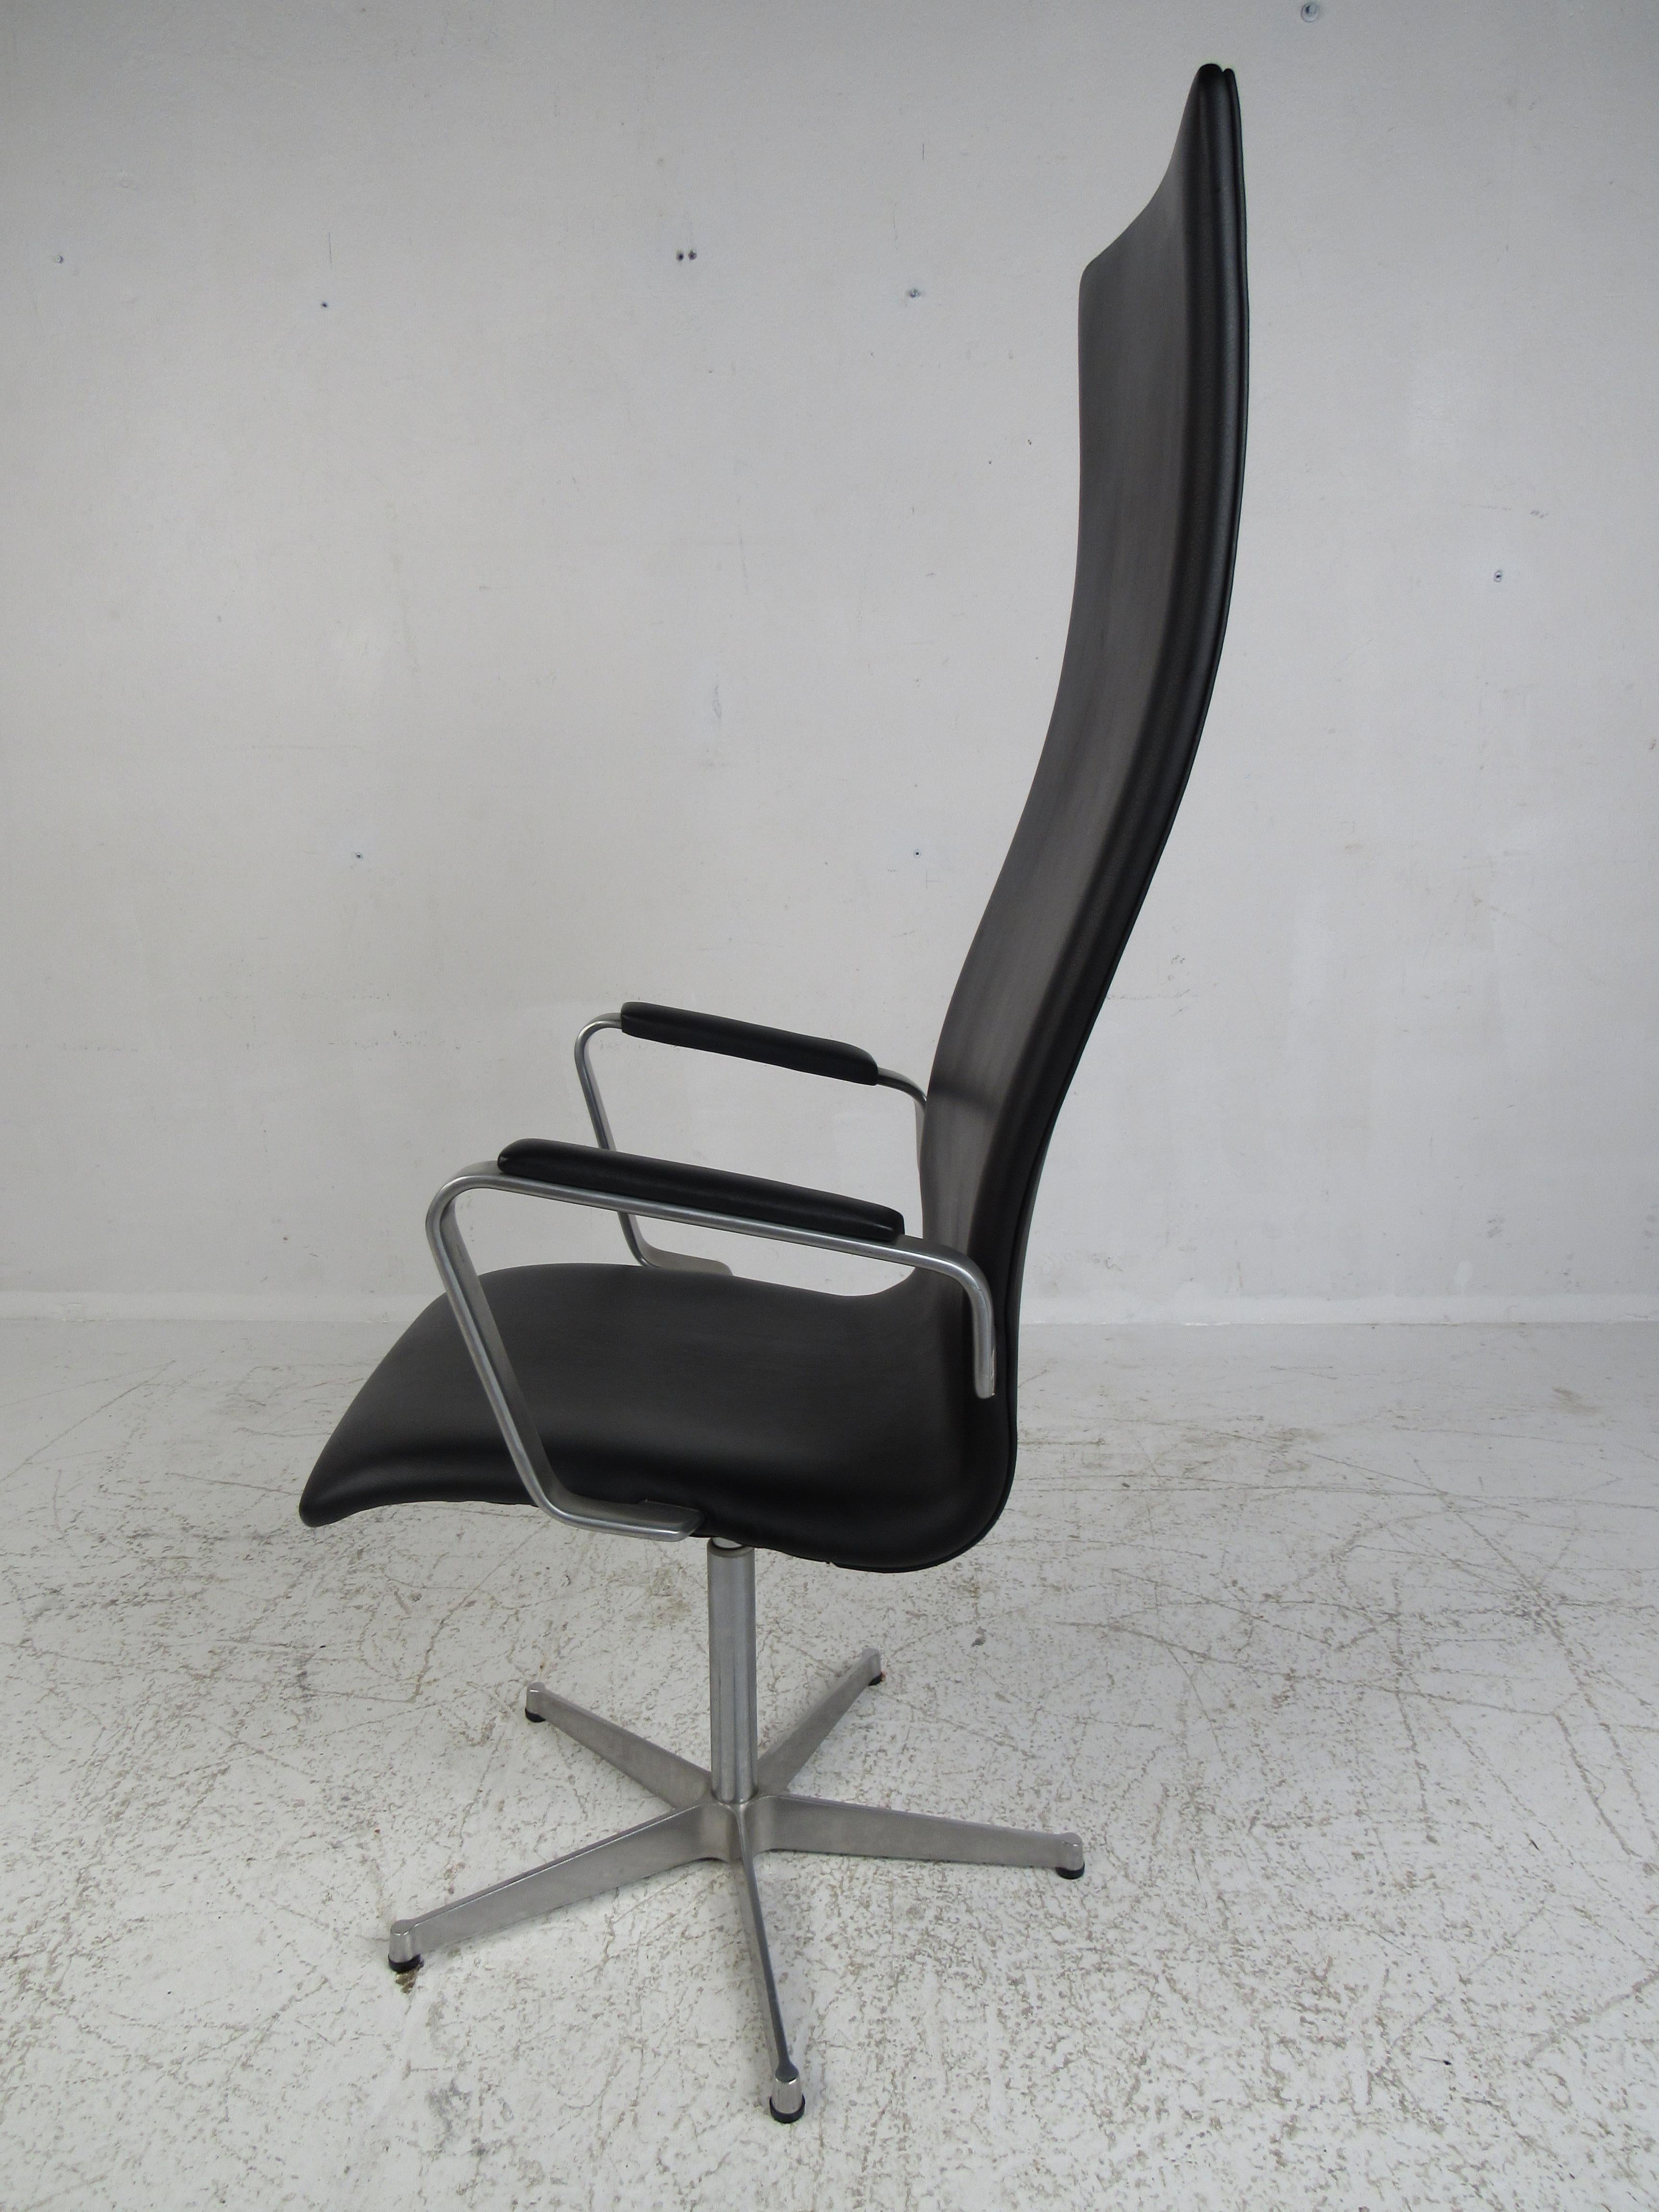 This stunning vintage modern desk chair boasts a tag underneath with the date 1980 and designer name, 